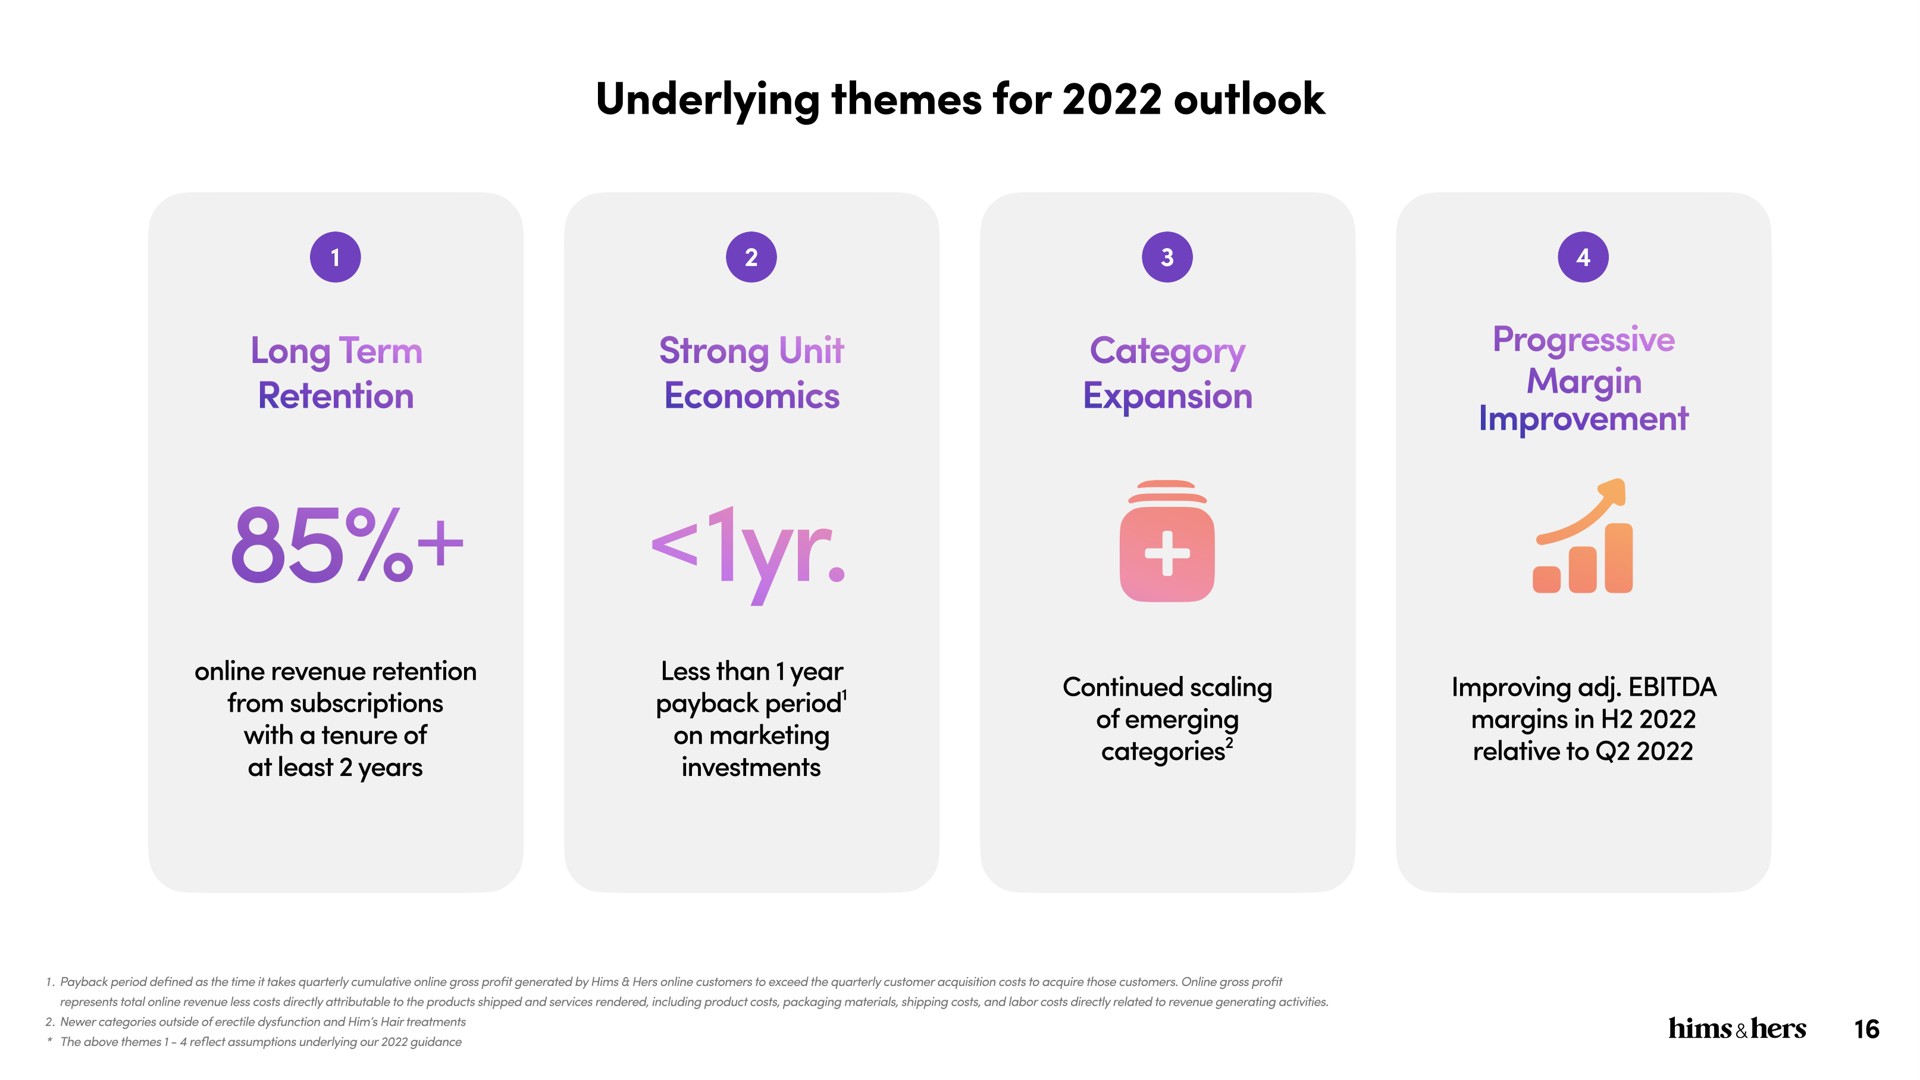 underlying themes for outlook | Hims & Hers